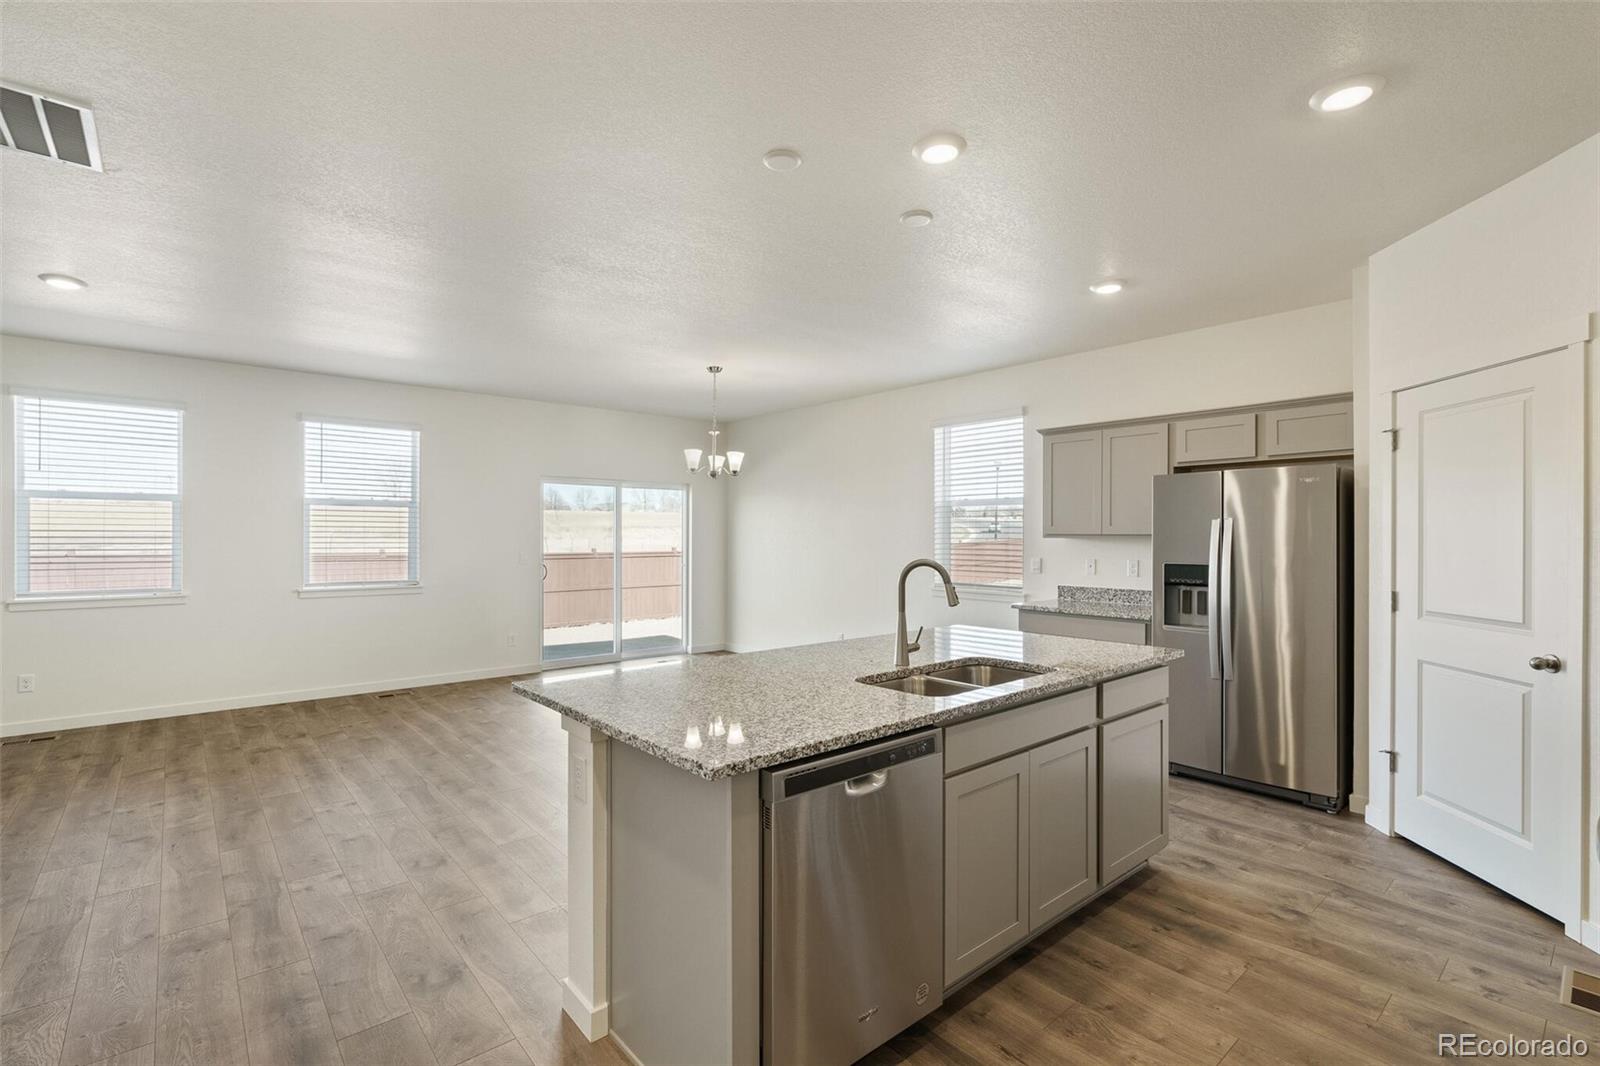 6117 1st, Greeley, CO